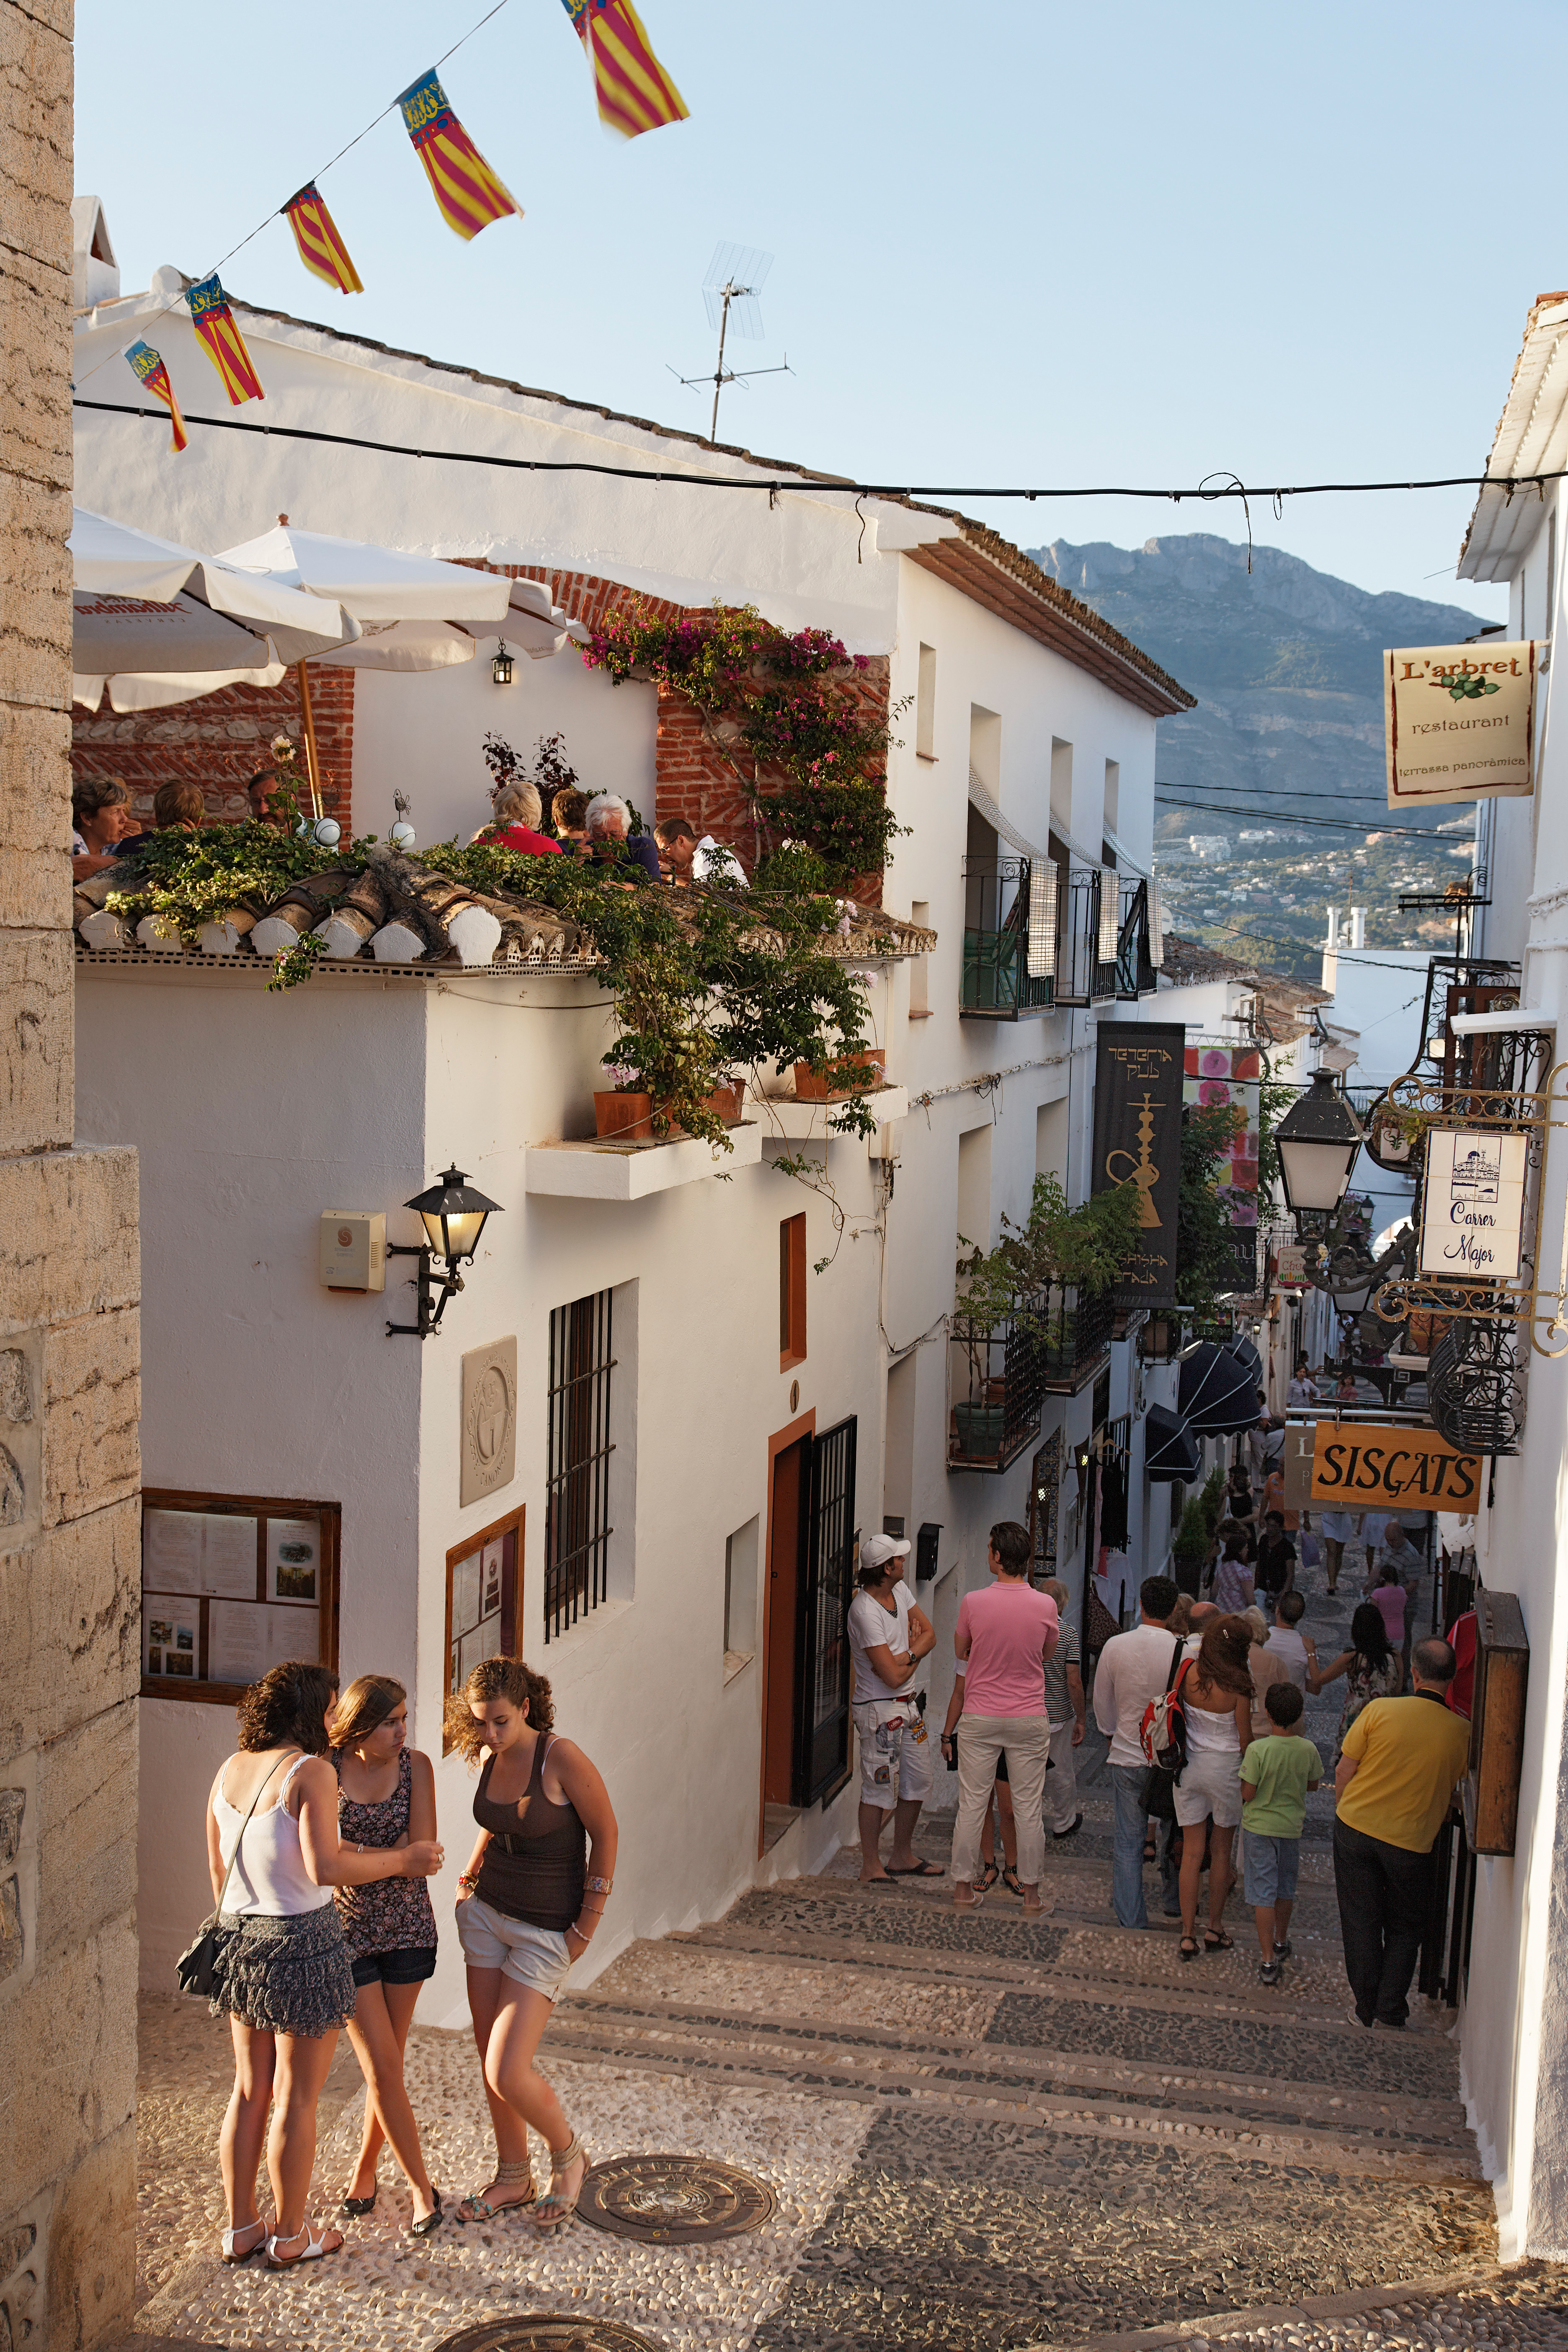 Altea, a town in the Alicante province along the Mediterranean, is known for a quaint old town with winding—and sometimes steep—streets.